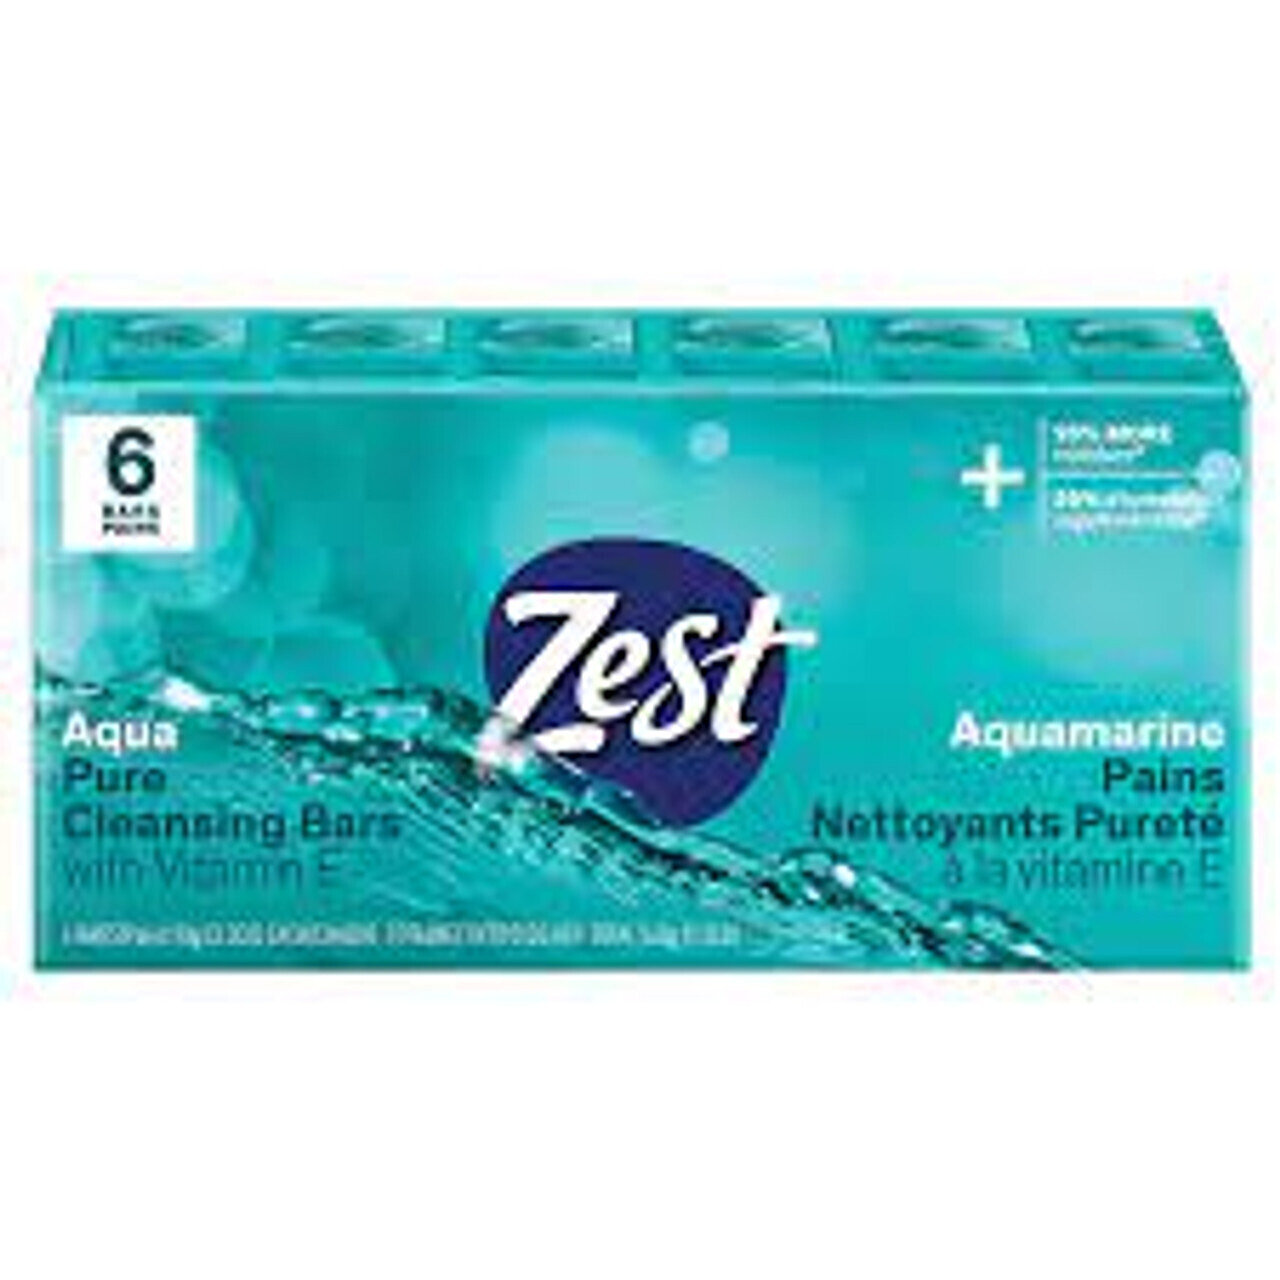 Zest Aqua Pure Cleansing Bars with Vitamin E,  6 s X 90 g